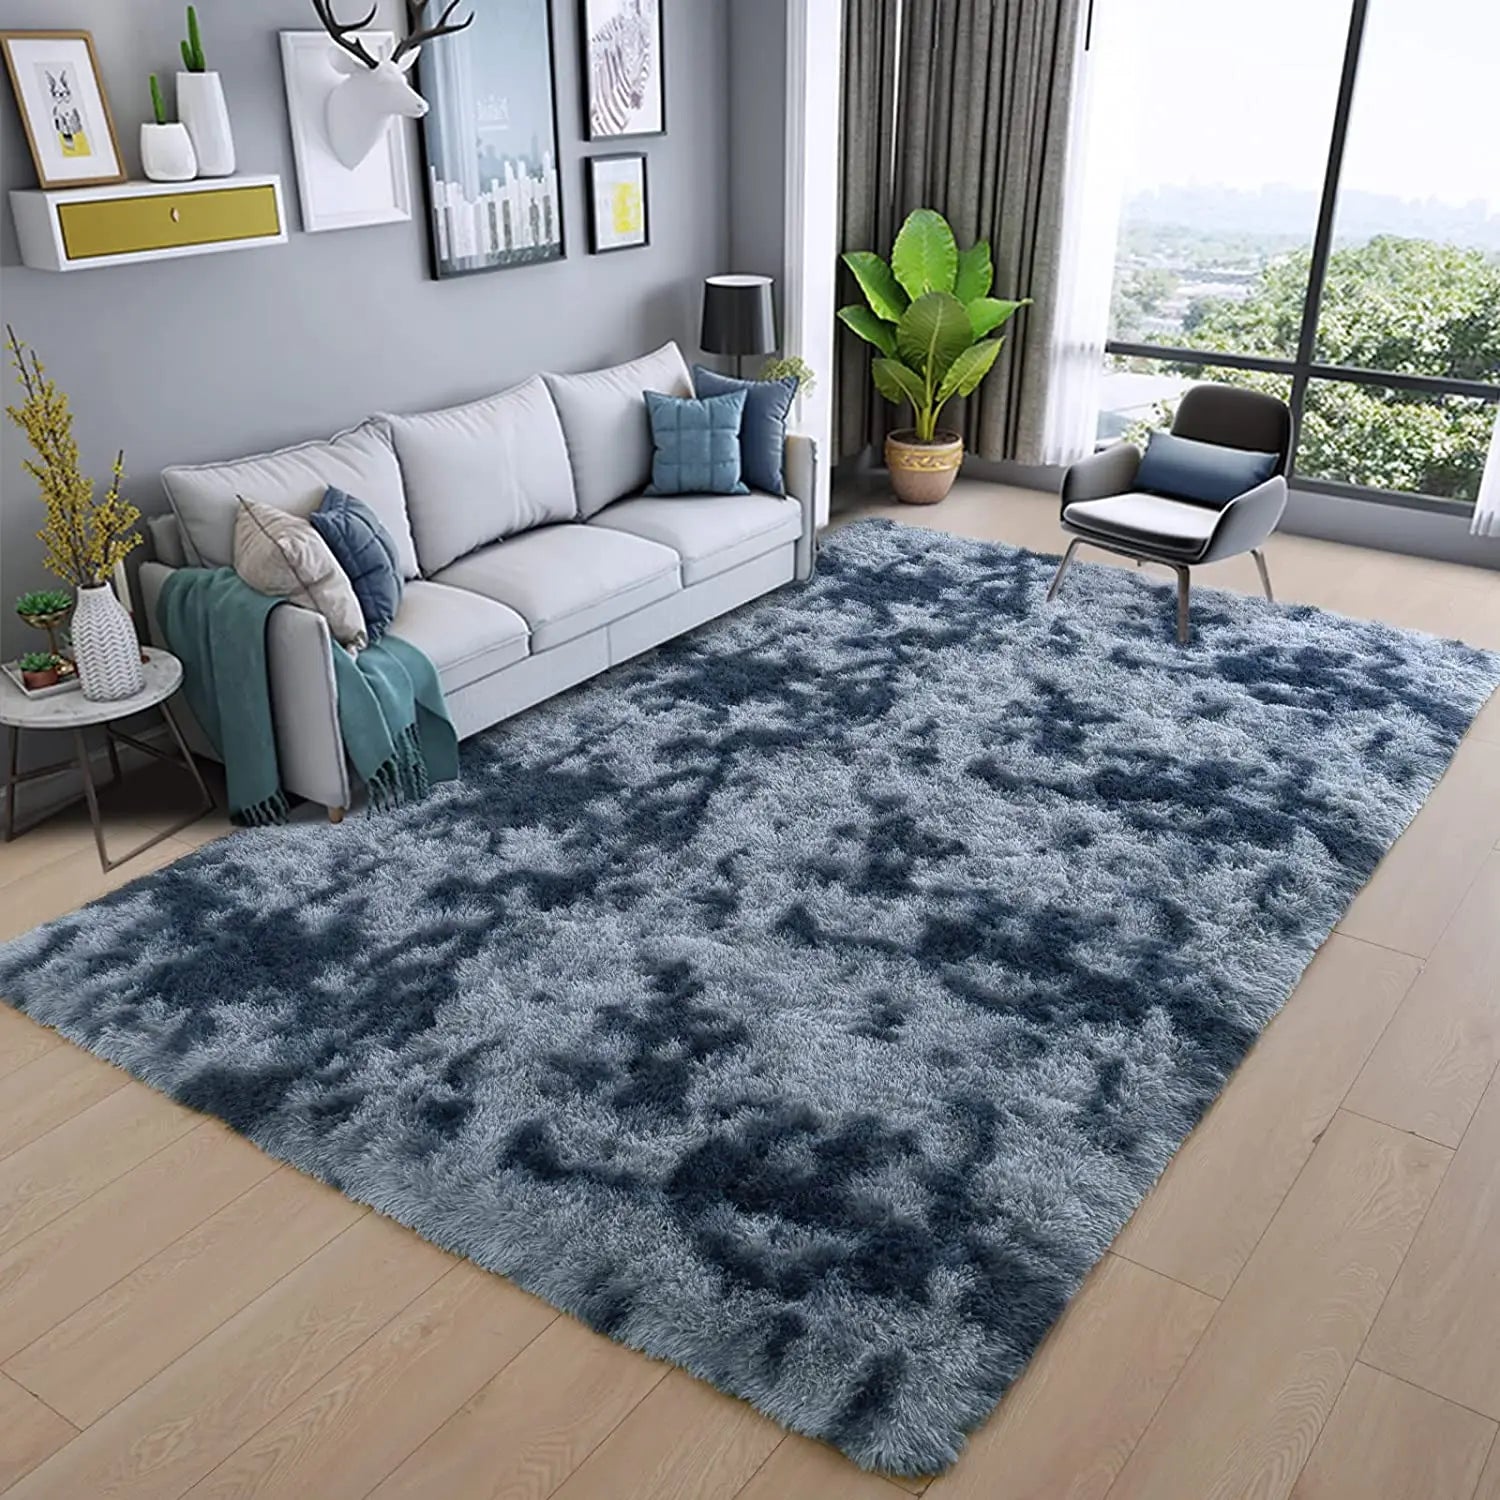 Fluffy plush tie dyed Large carpet Living room decor rug Child non-slip floor mat bedroom Stitch carpets Home decoration rugs ShopOnlyDeal